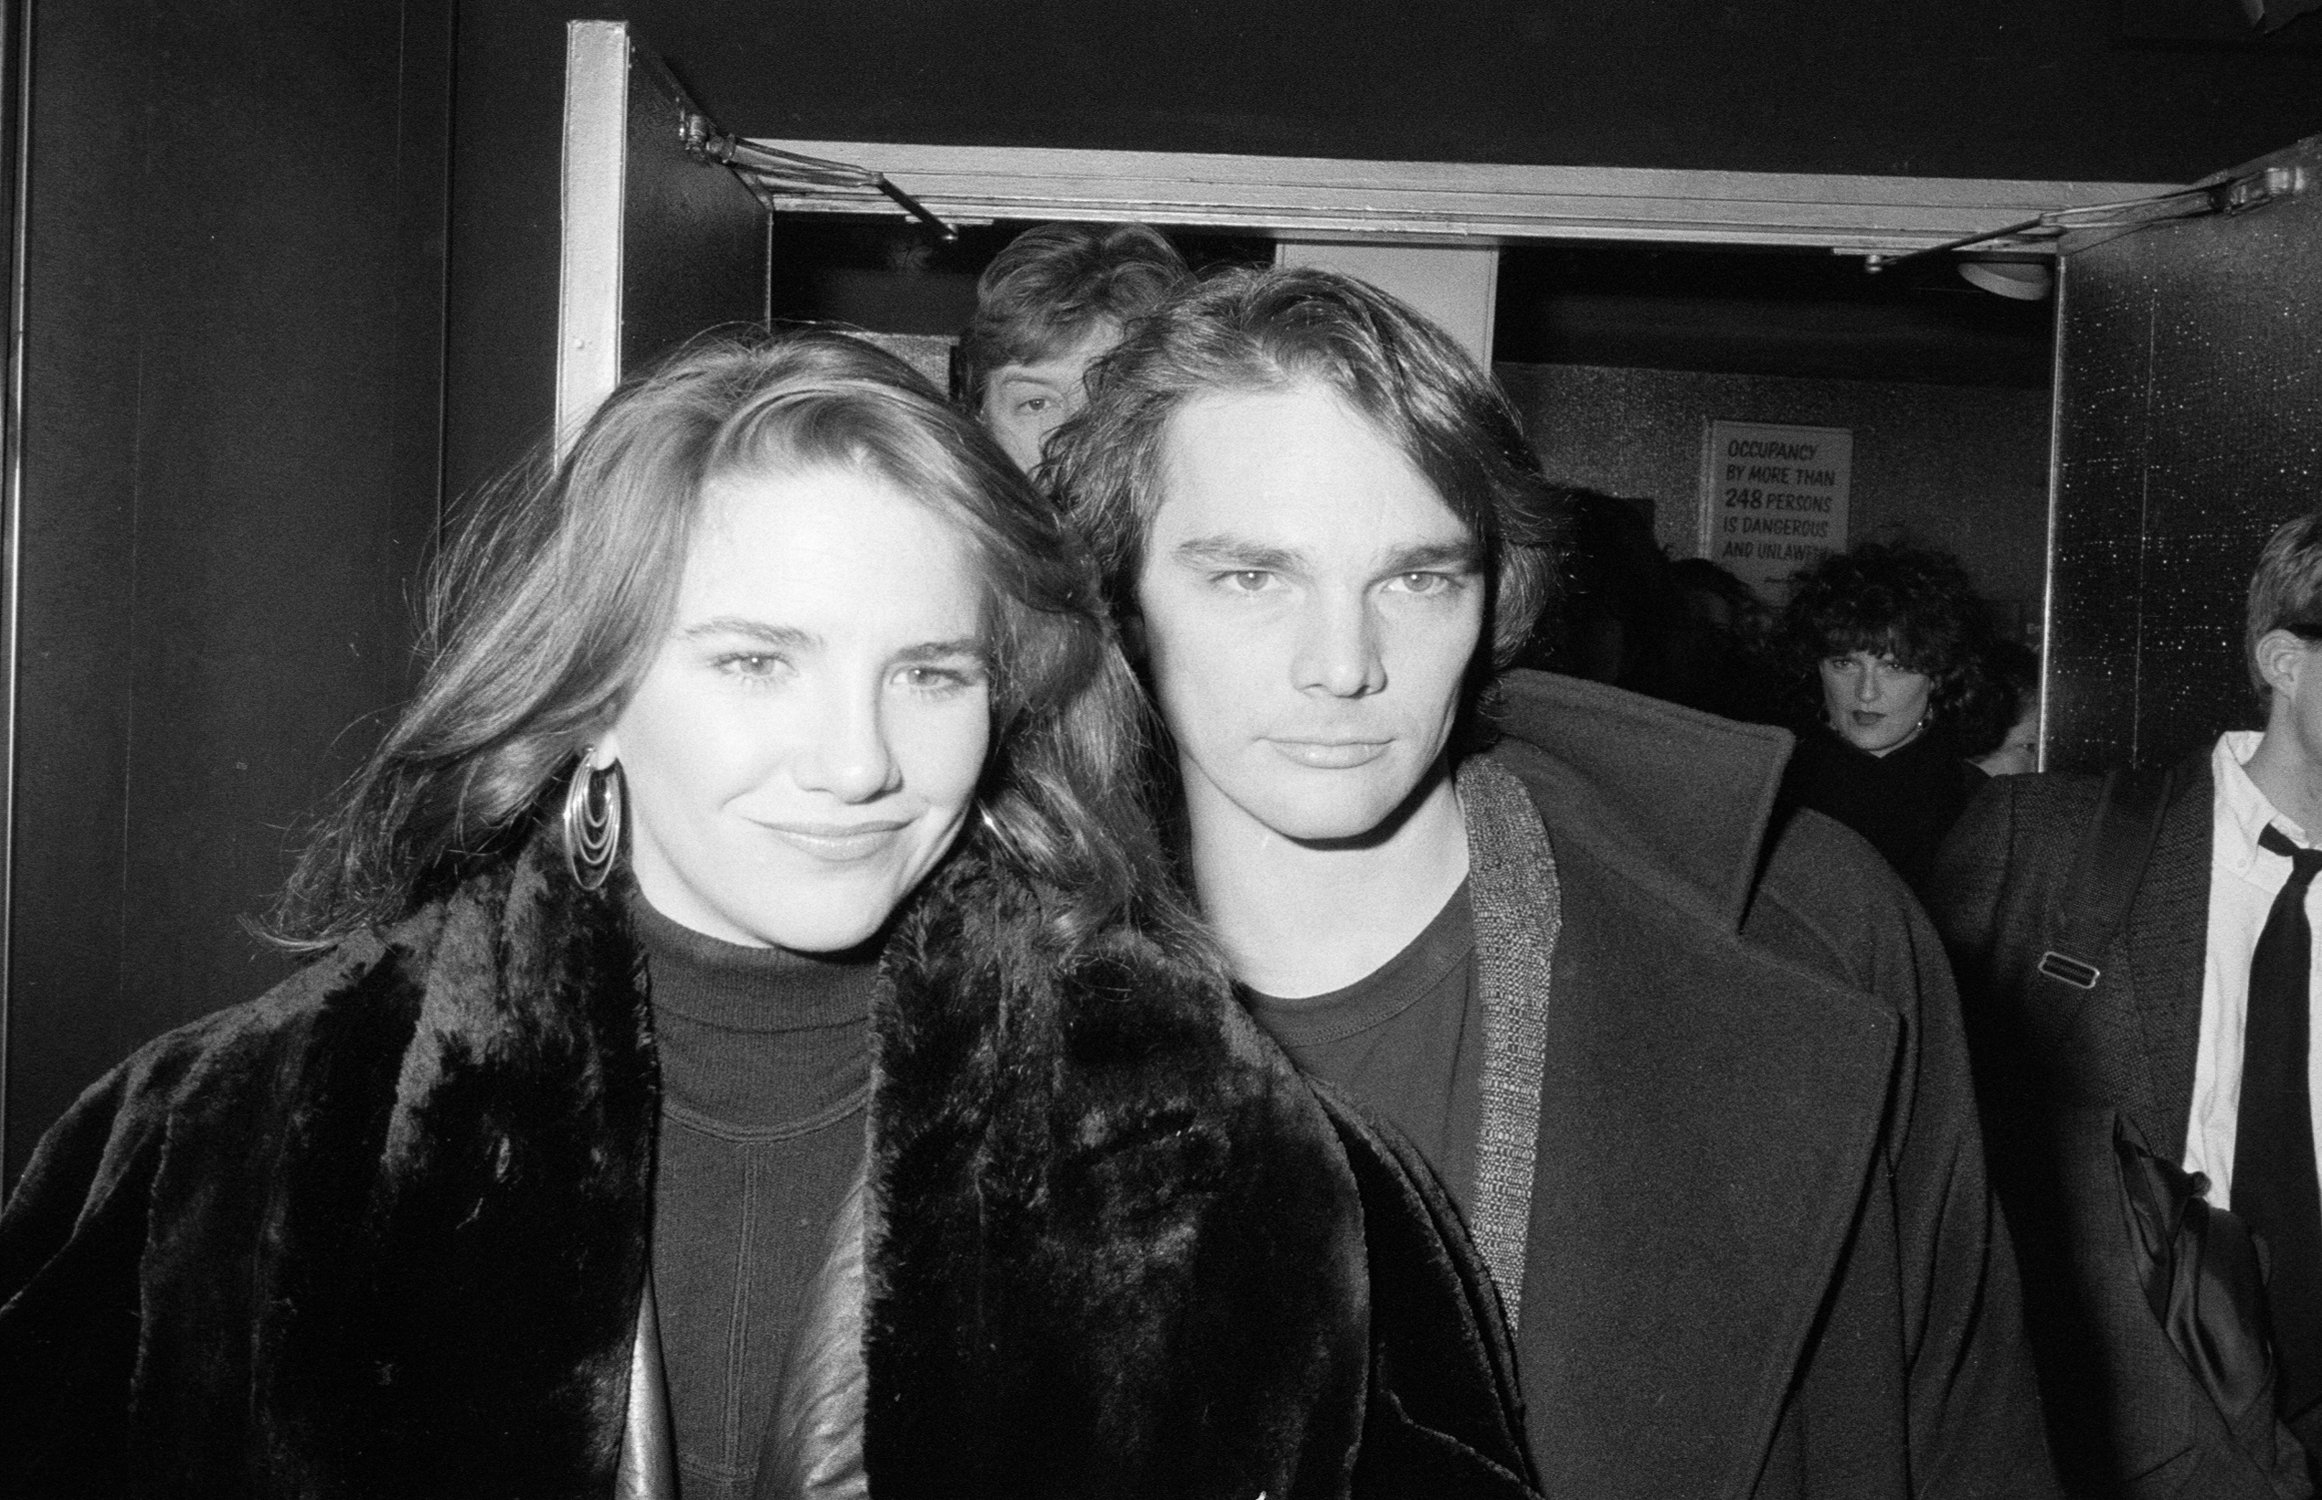 A close up of Melissa Gilbert and Bo Brinkman in black and white.